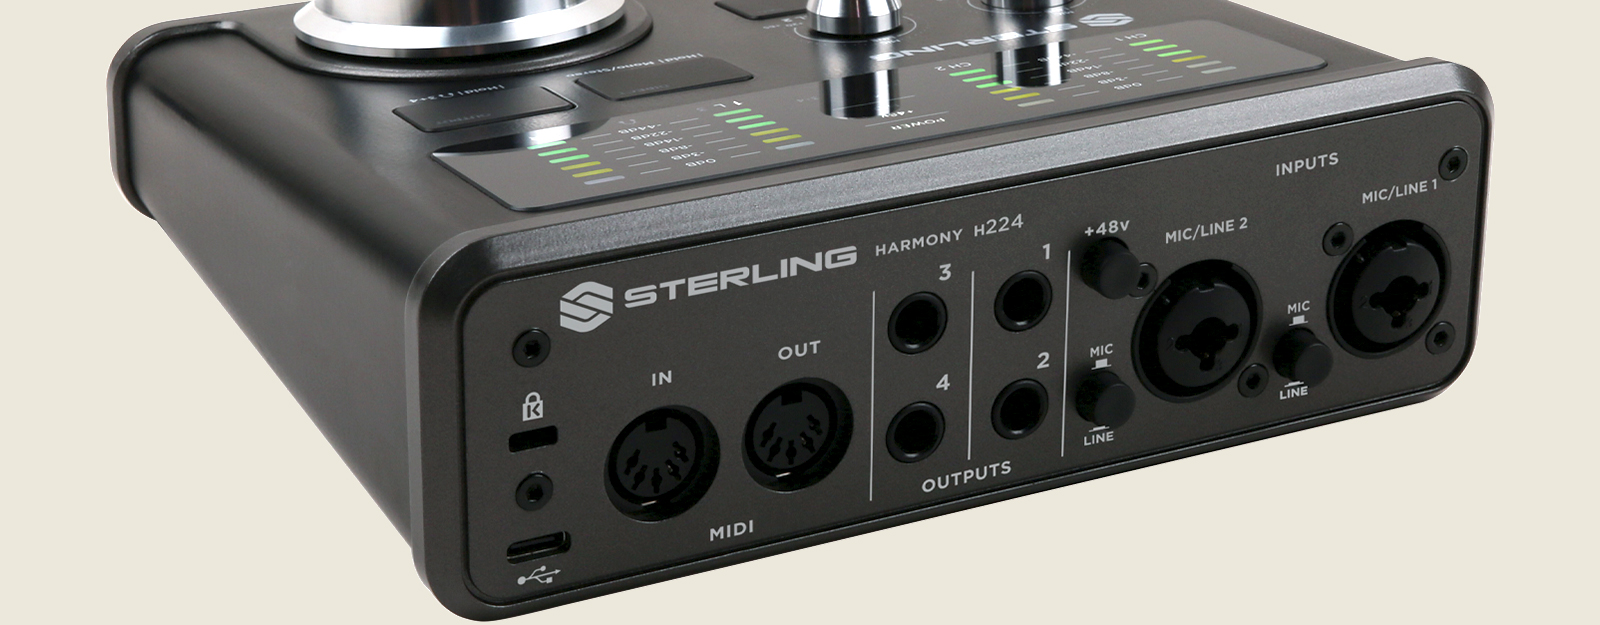 Sterling H224 harmony audio interface rear on light background.